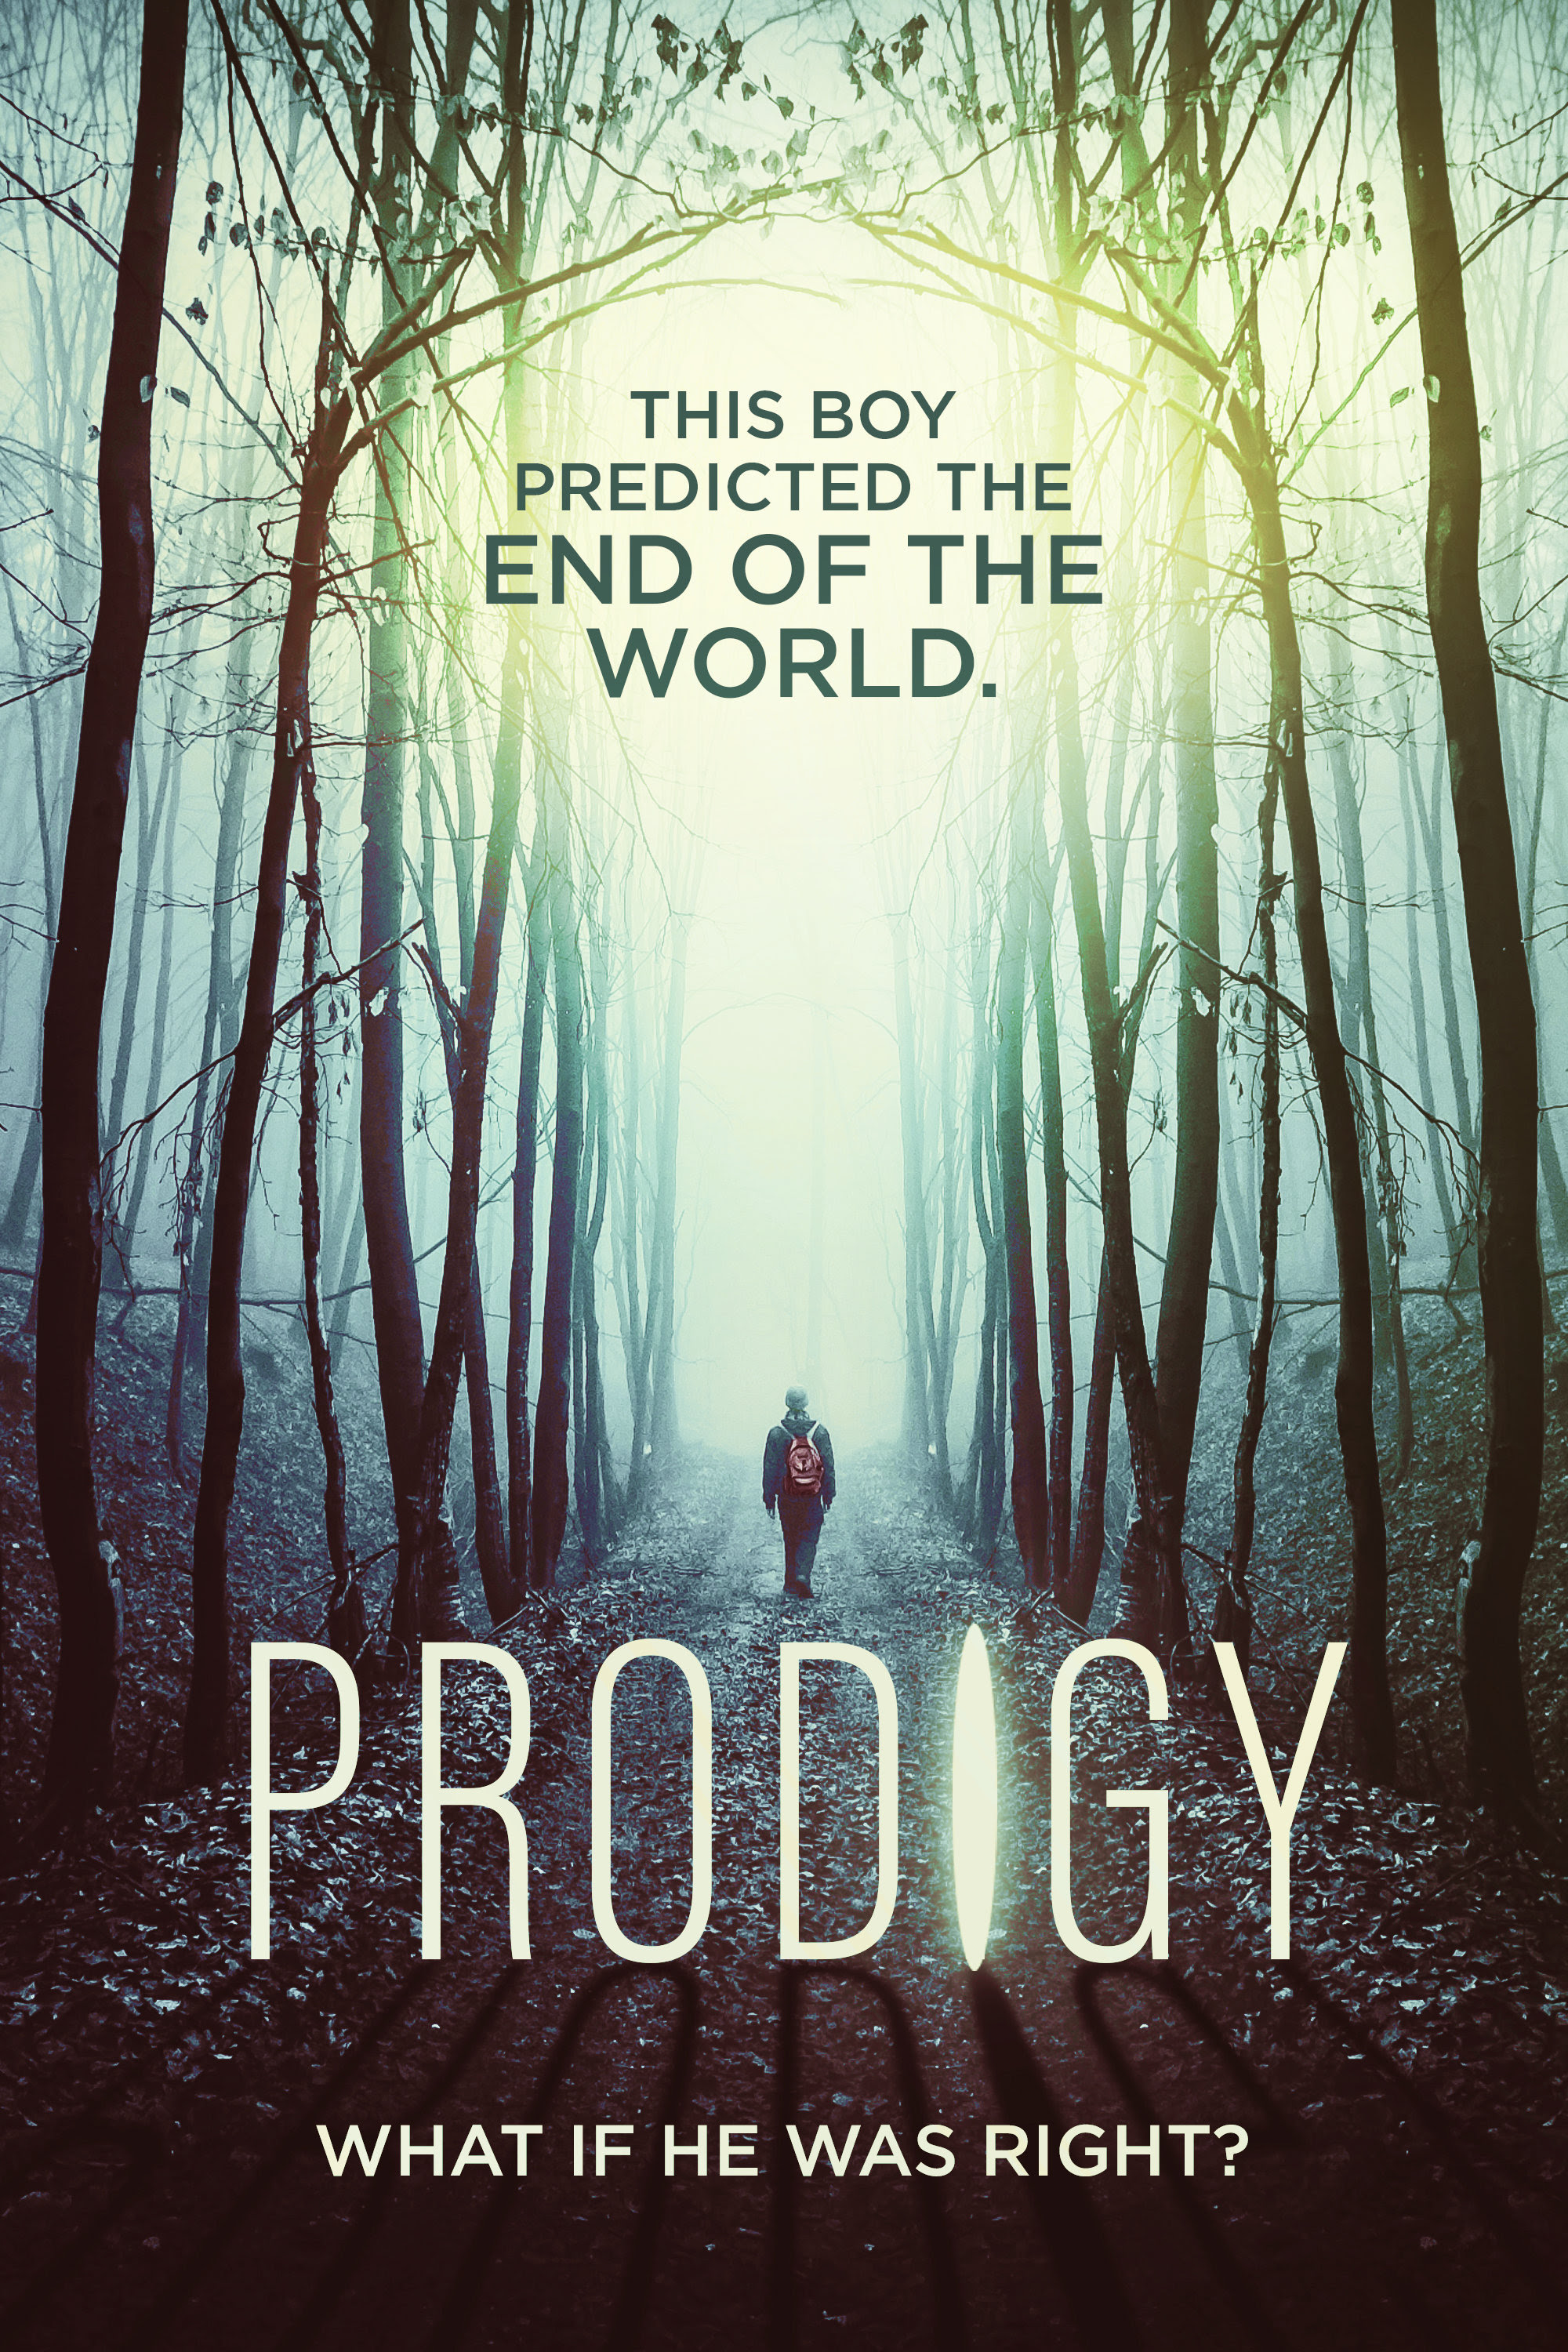 Prodigy Trailer Prods Apocalyptic Fears Horrorbuzz